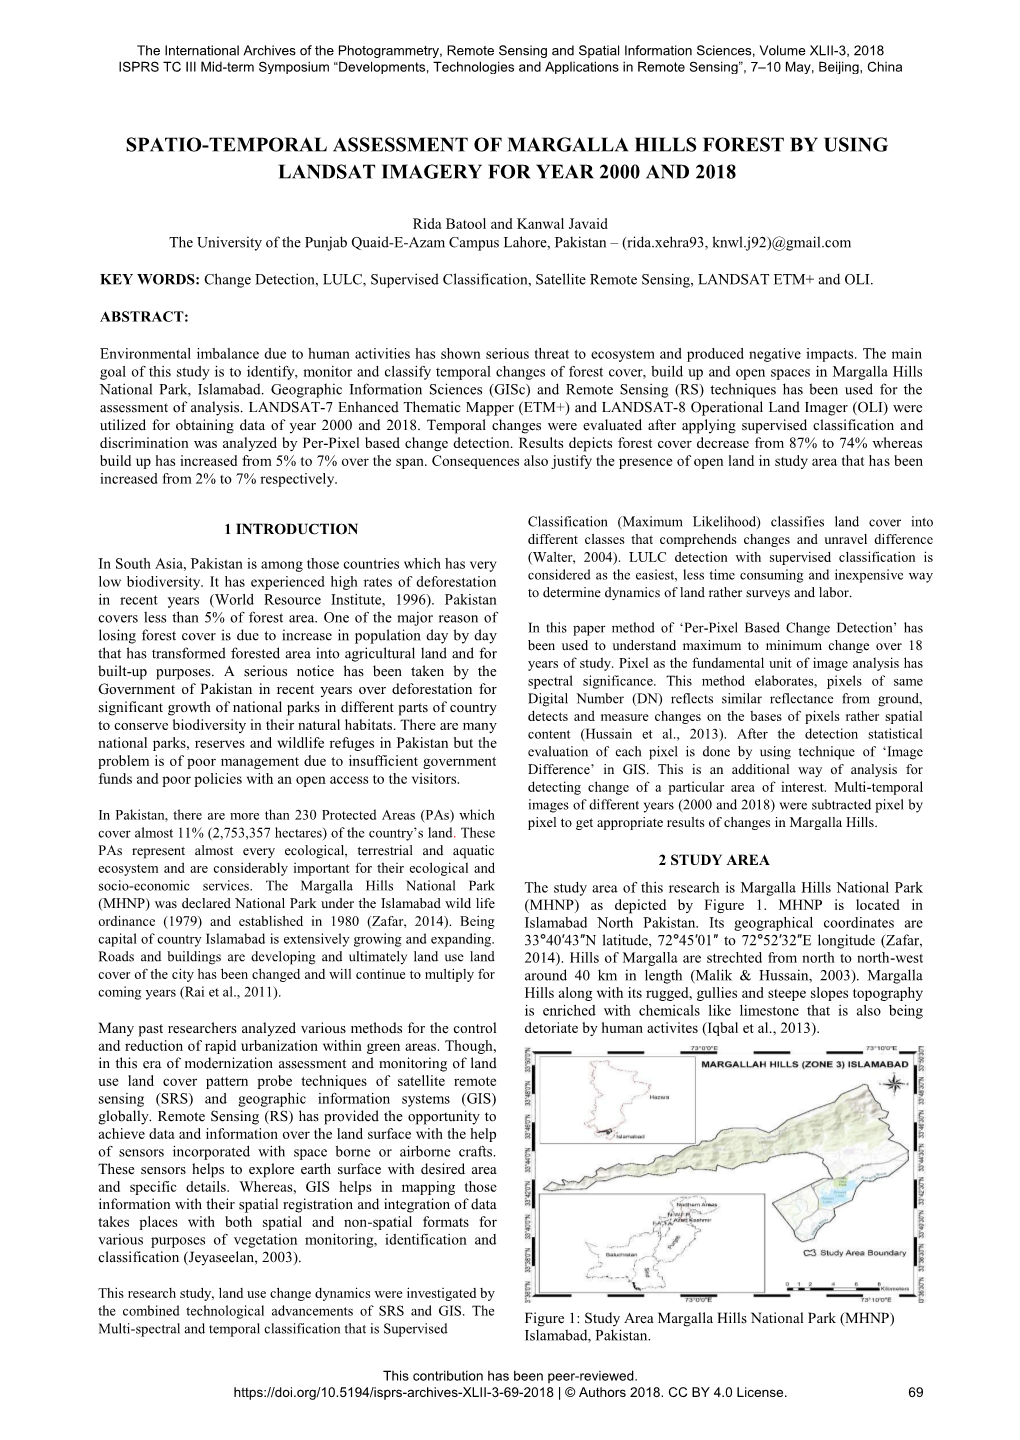 Spatio-Temporal Assessment of Margalla Hills Forest by Using Landsat Imagery for Year 2000 and 2018